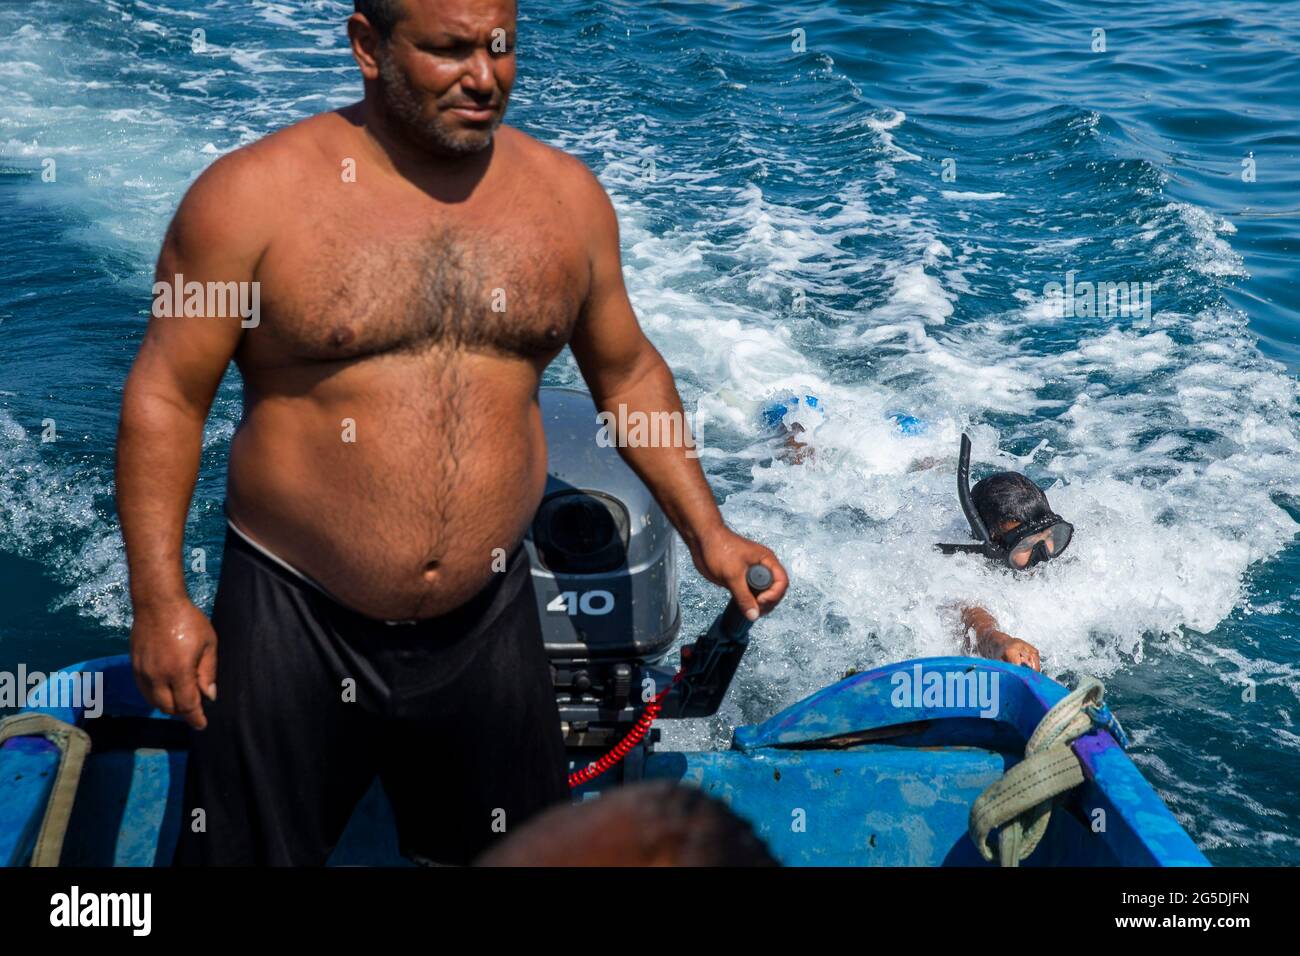 June 26, 2021, Beirut, Beirut, Lebanon: Fisherman Mohammad Itani pilots the boat while his son, Moustapha Itani, gets towed as they move to the submerged cages they are using to catch fish in the Mediterranean Sea near the Rock of RaouchÅ½, Beirut, Lebanon on June 26, 2021. Fishermen use to get paid LL10,000 for each kilogram (2.2 pounds) of fish when the Lebanese Lira traded at LL1,500 per $1. Today, the LiraÃs value hit a record low, trading at least at LL18,000, yet the fishermen get paid LL25,000 per kilogram of fish. Their diminished wages make boat upkeep difficult so some fishers, unab Stock Photo